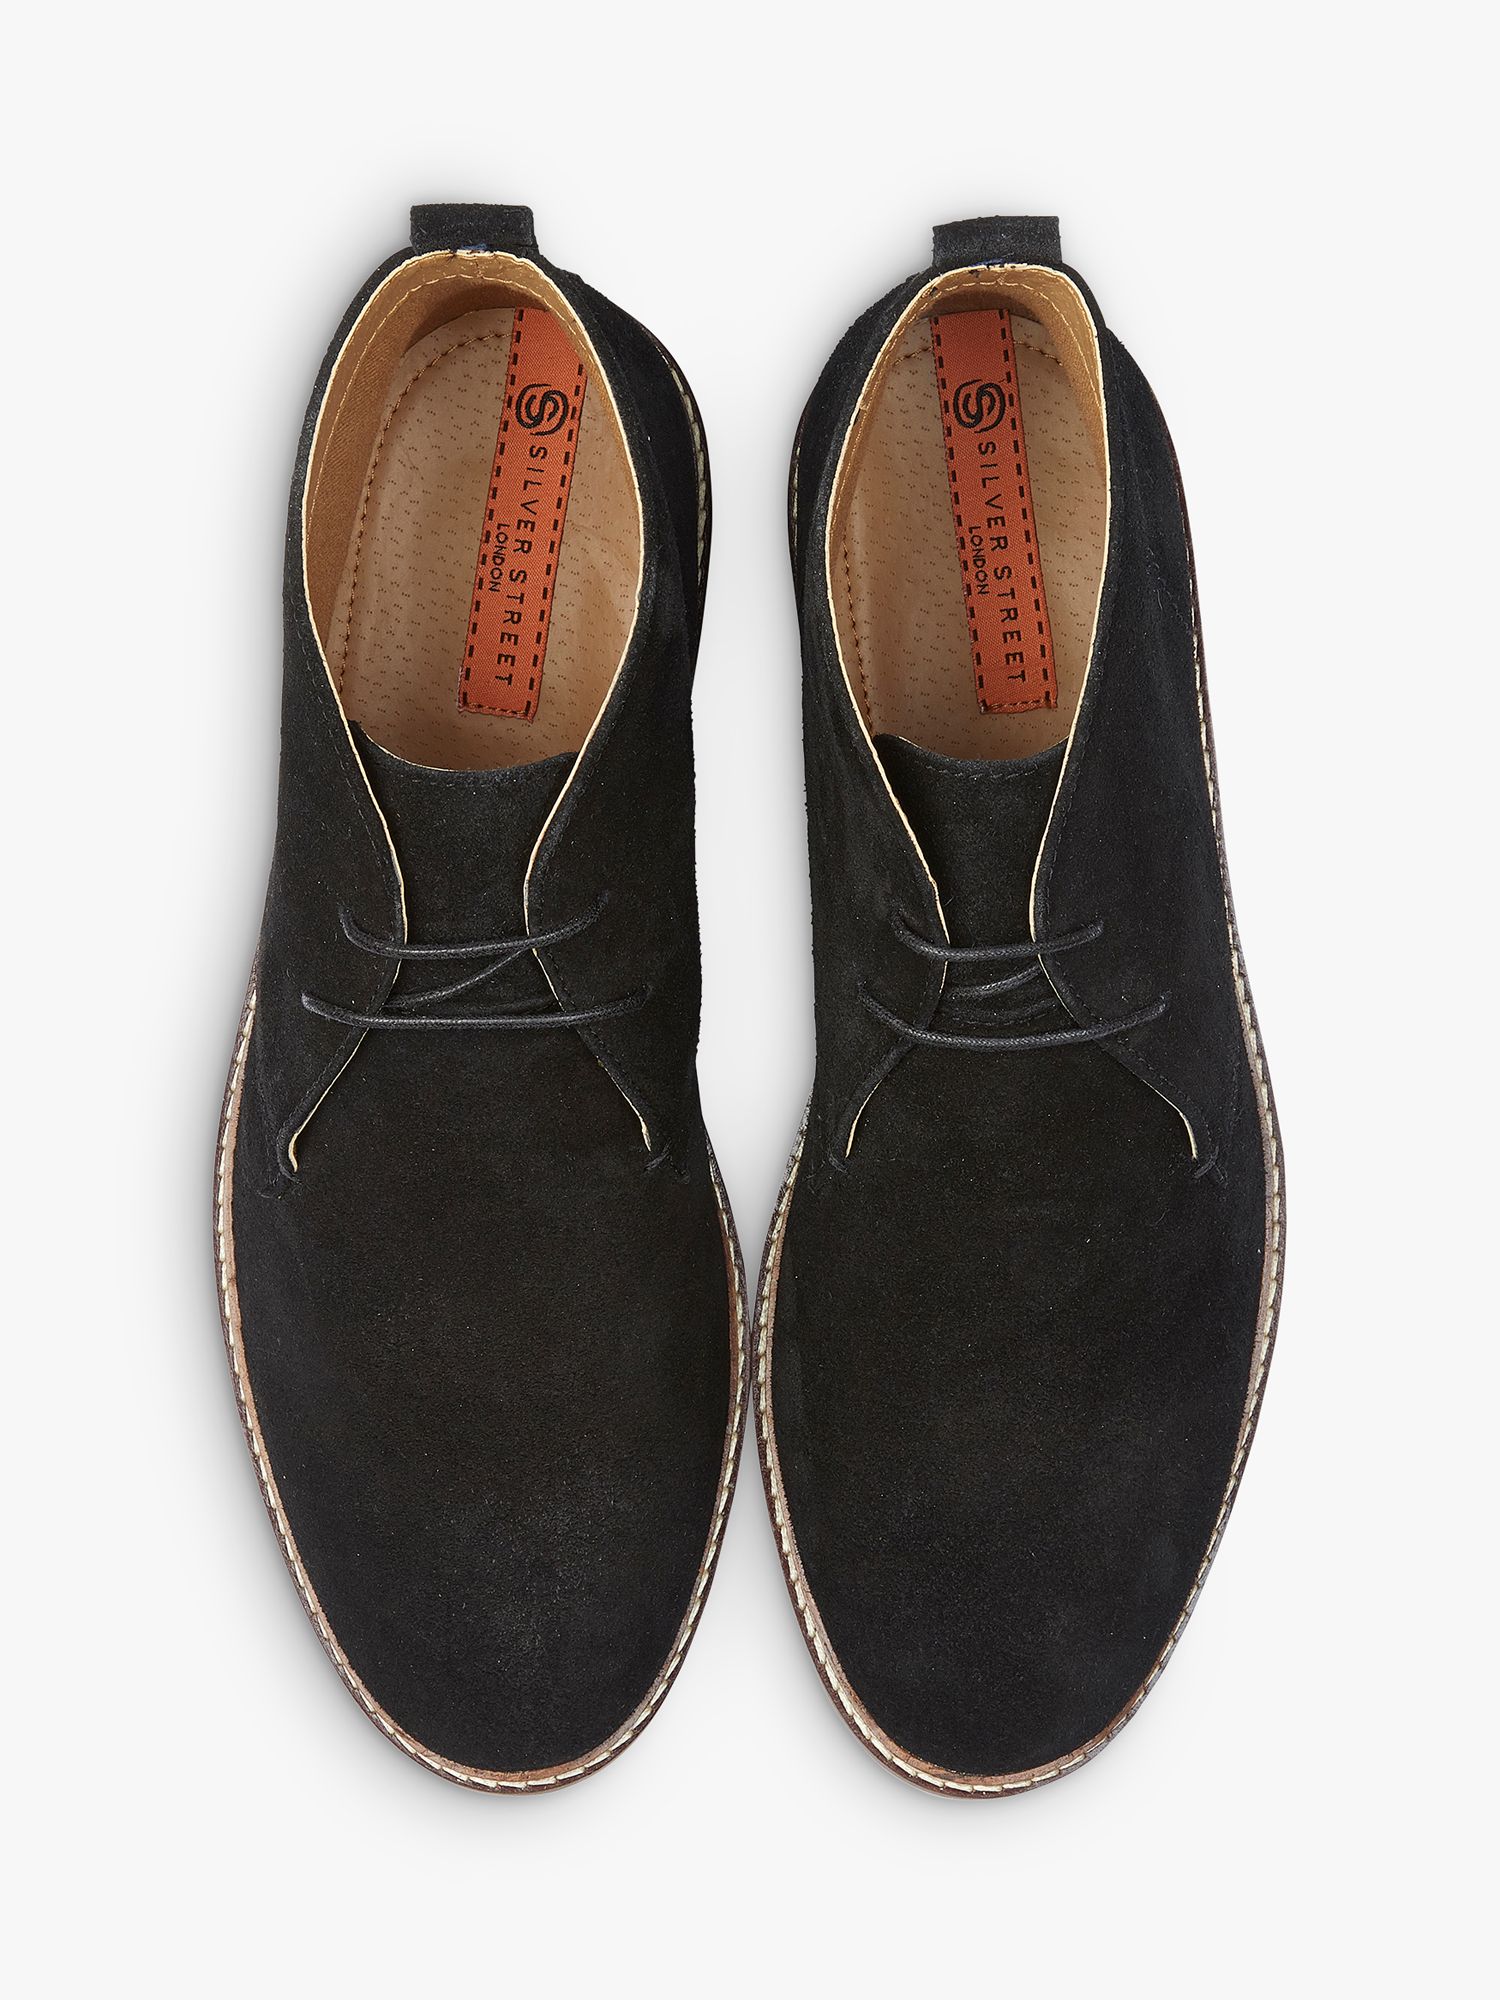 Silver Street London Wicked Suede Chukka Boots, Black at John Lewis ...